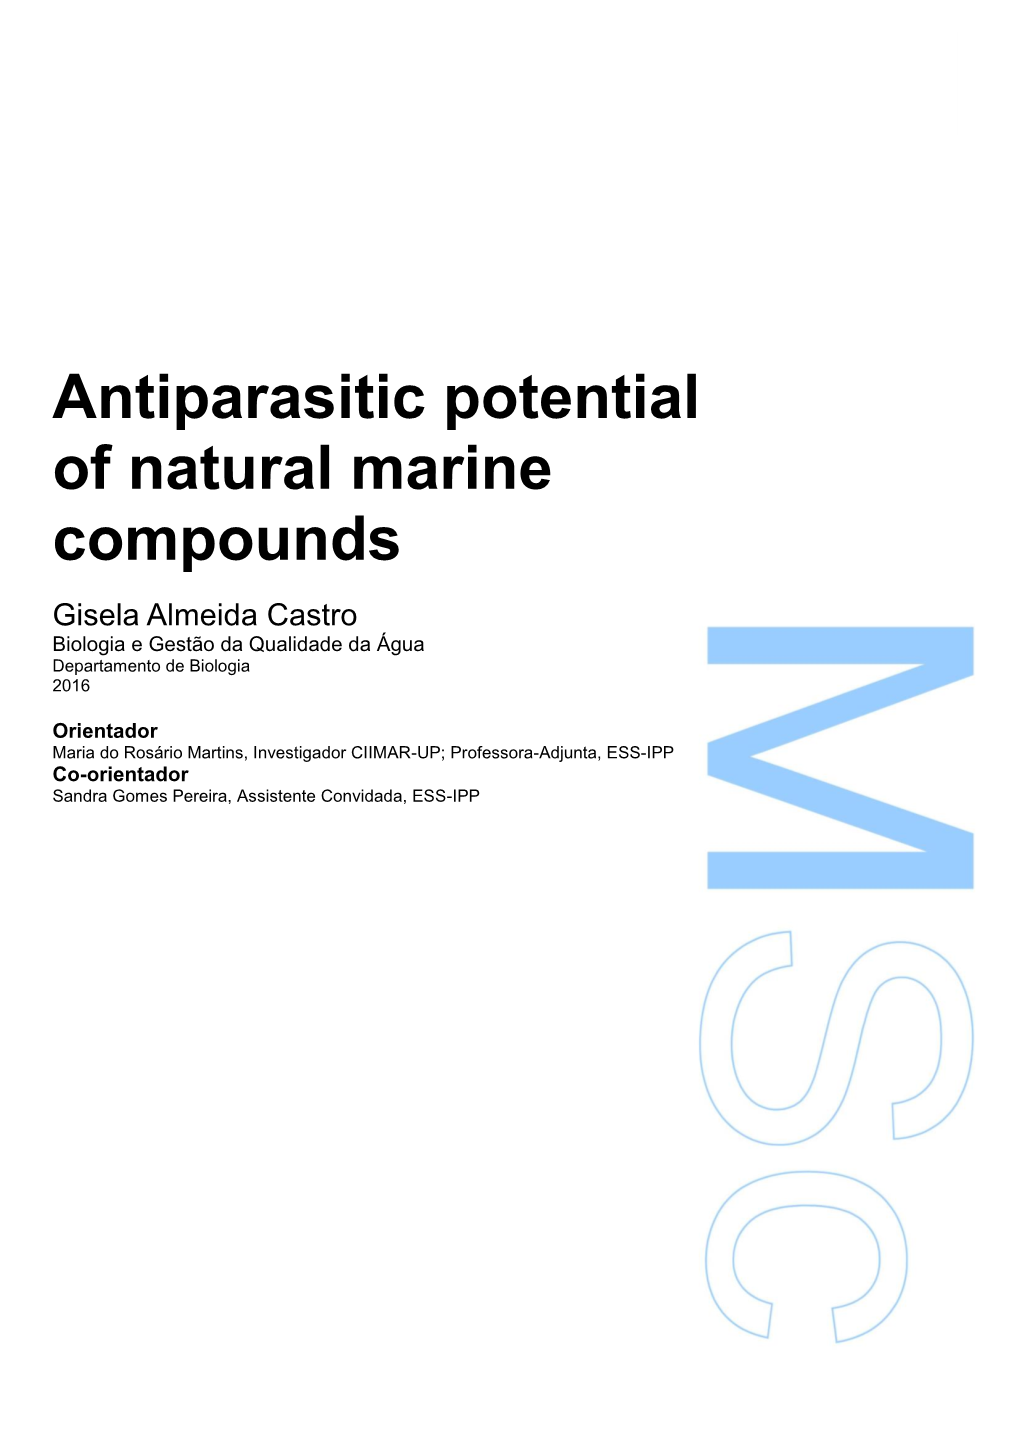 Antiparasitic Potential of Natural Marine Compounds